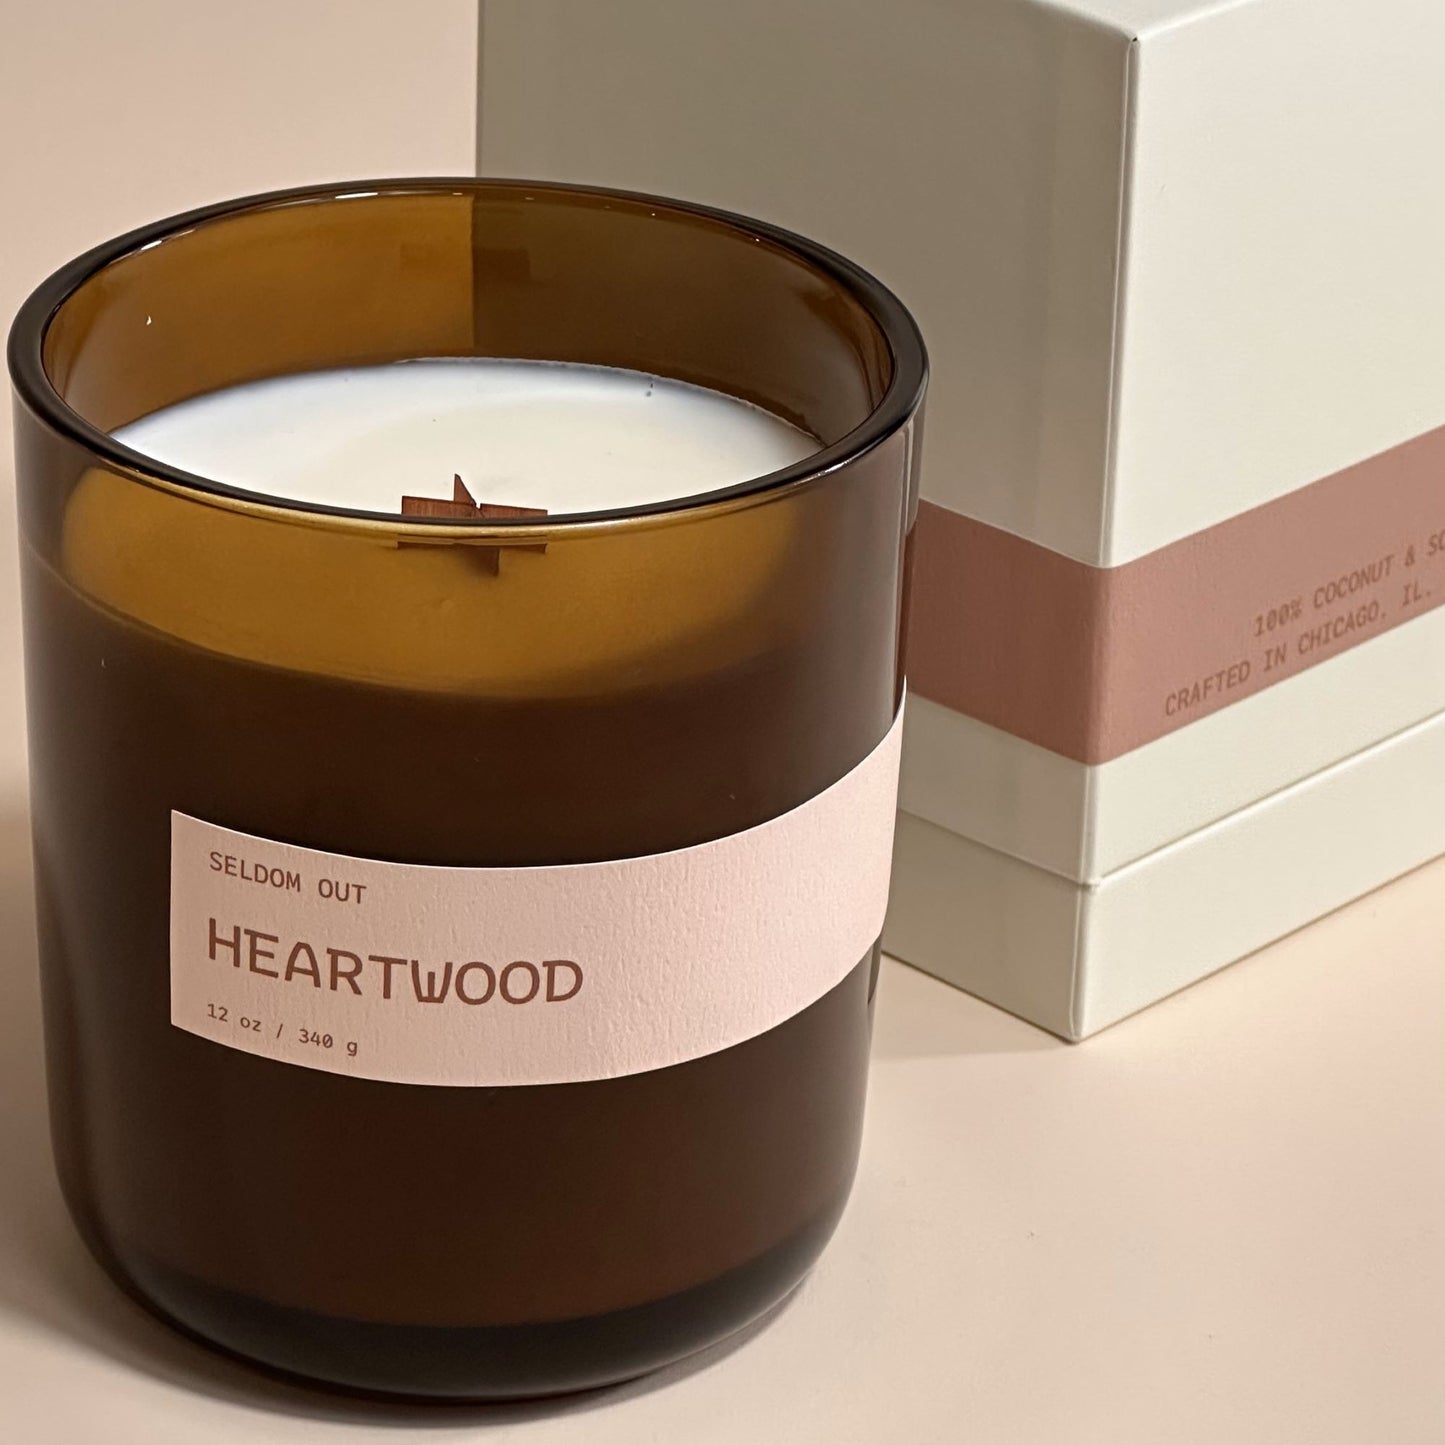 Heartwood Candle